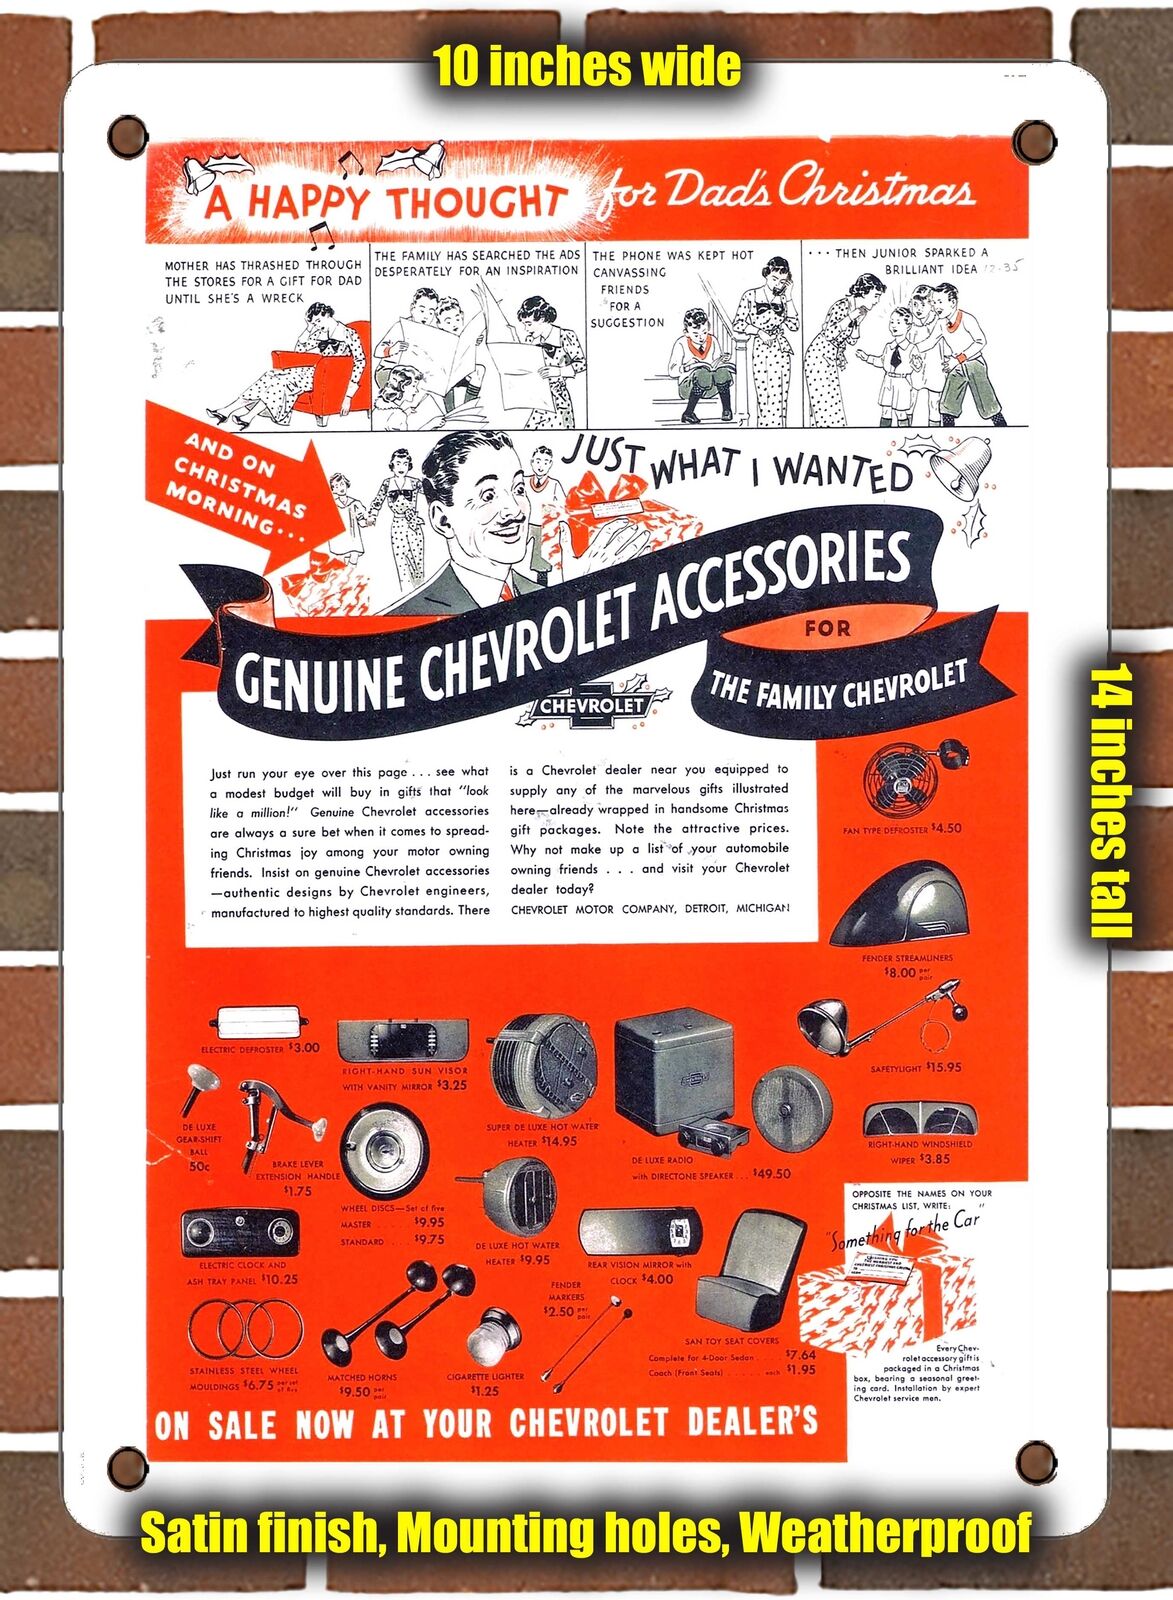 METAL SIGN - 1936 Chevy Accessories Ad - 10x14 Inches